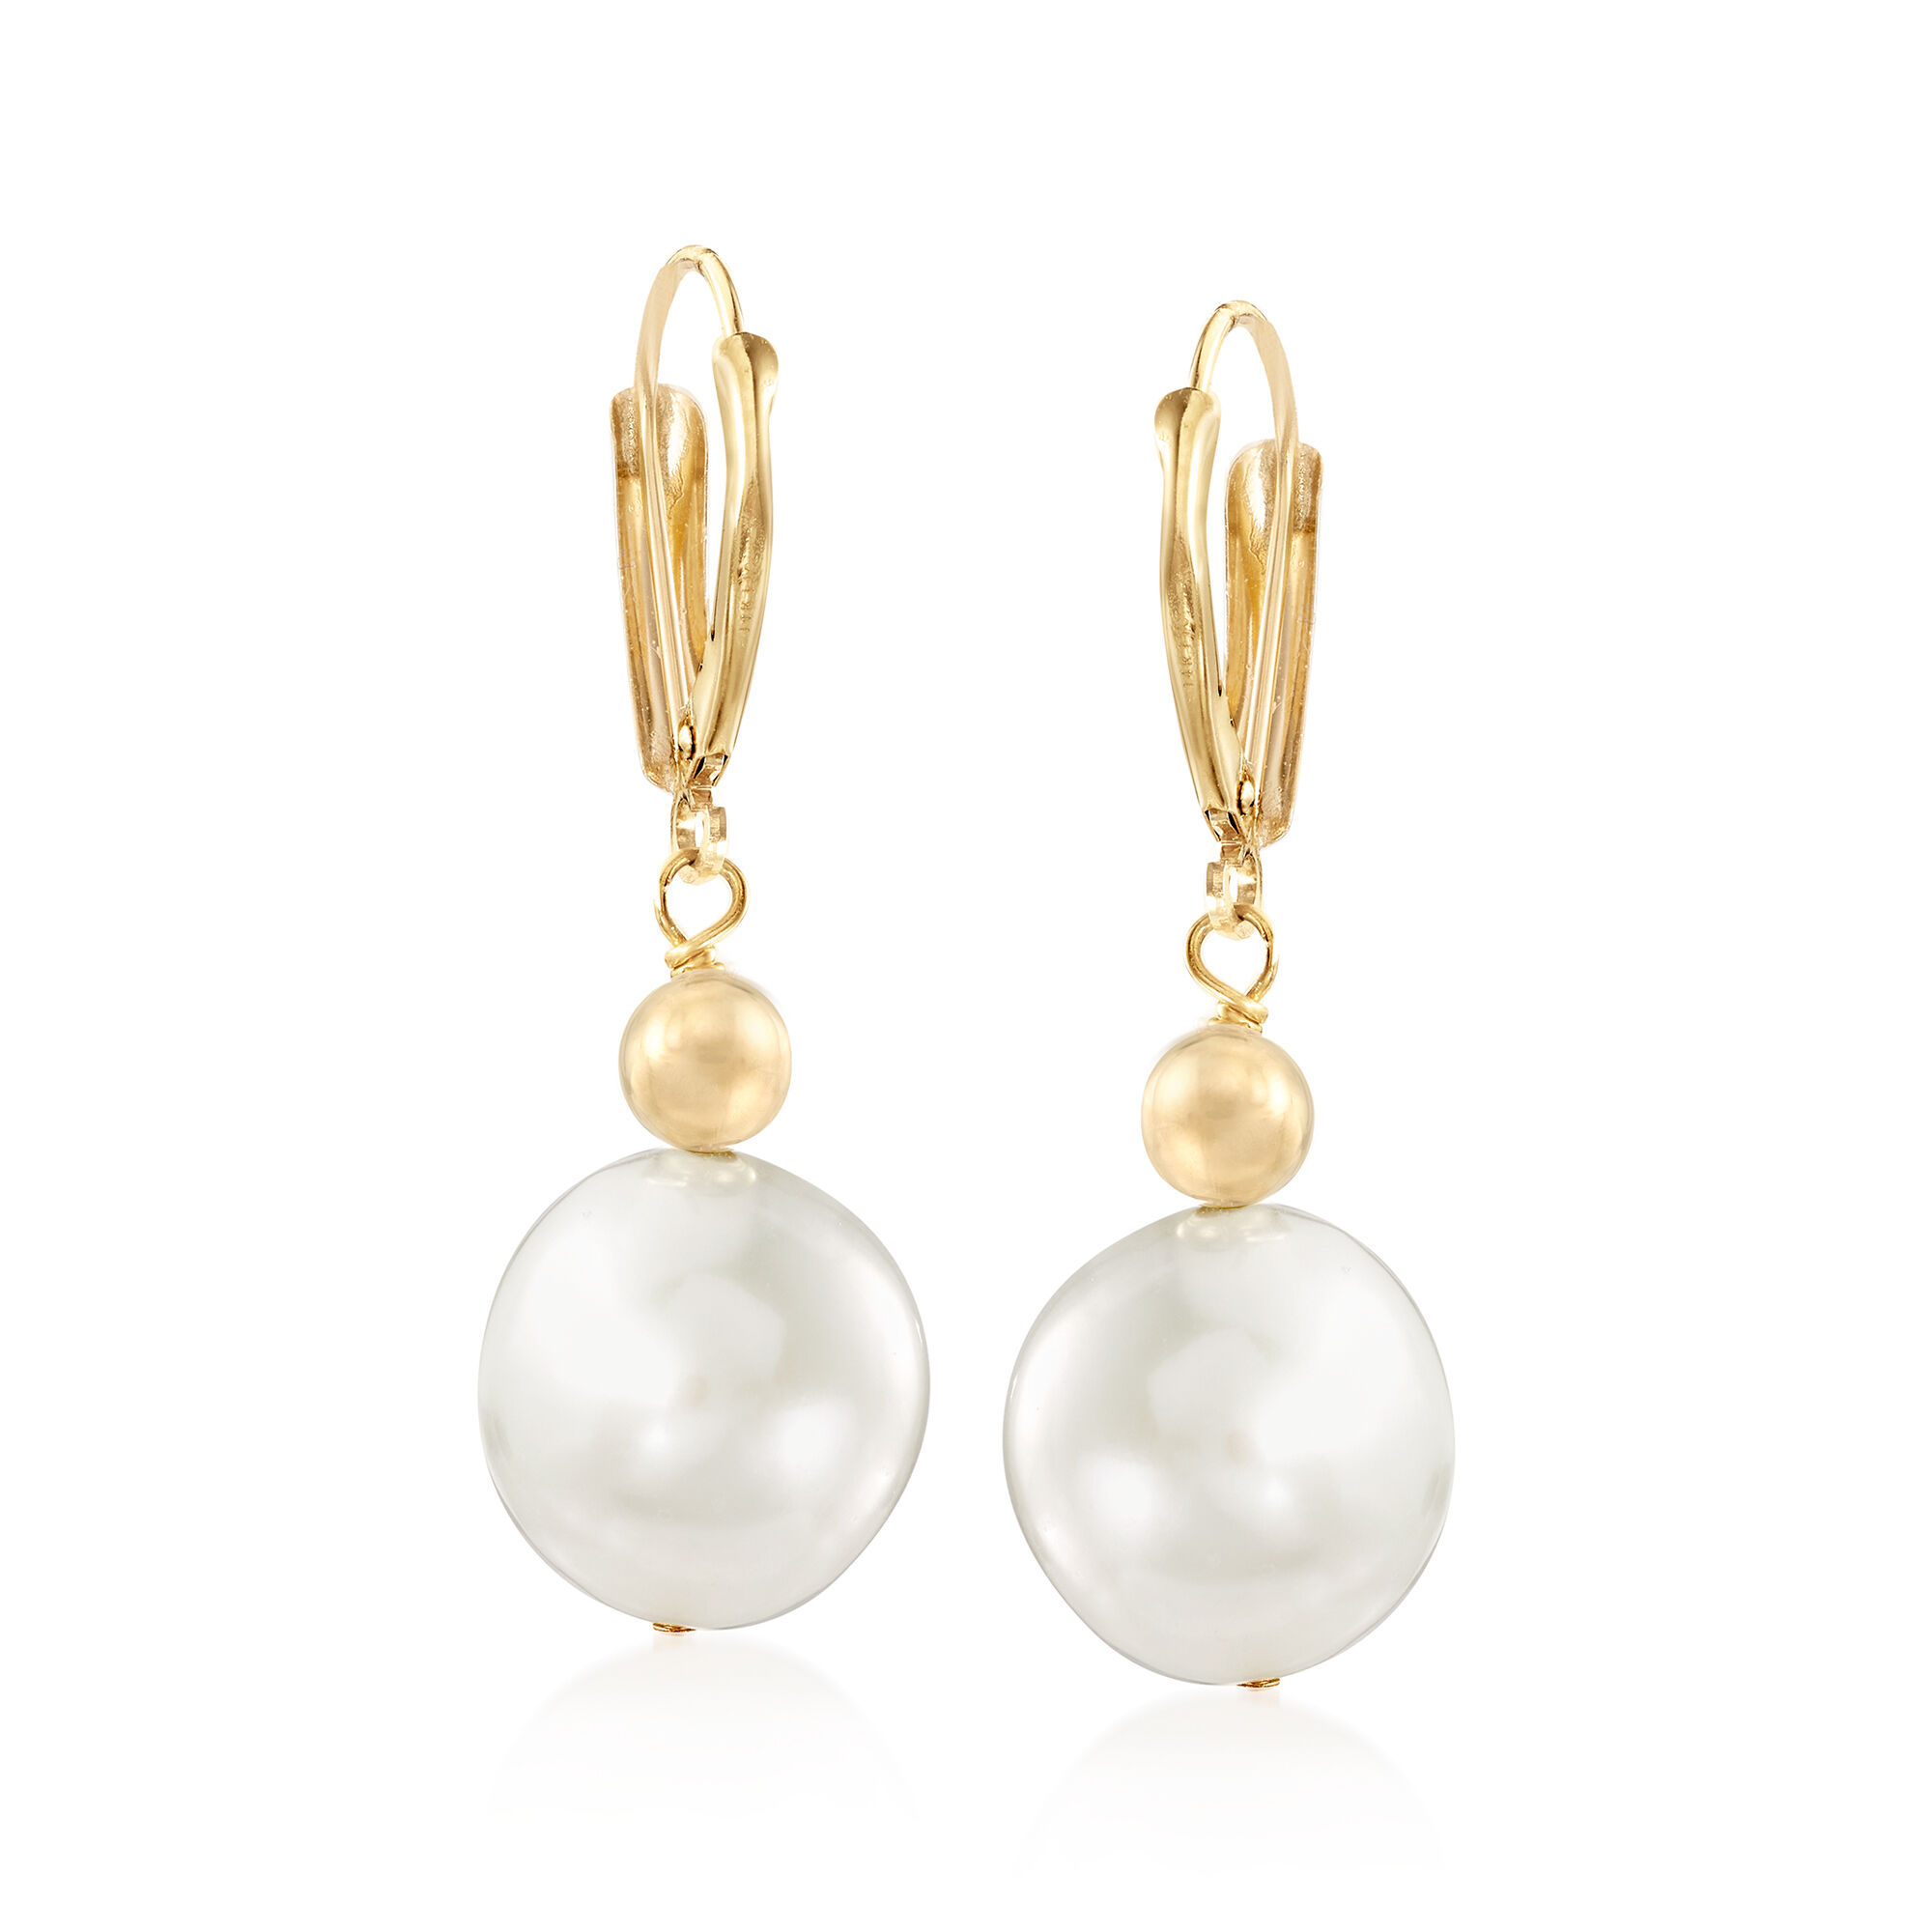 12-13mm Cultured Pearl Drop Earrings in 14kt Yellow Gold | Ross-Simons